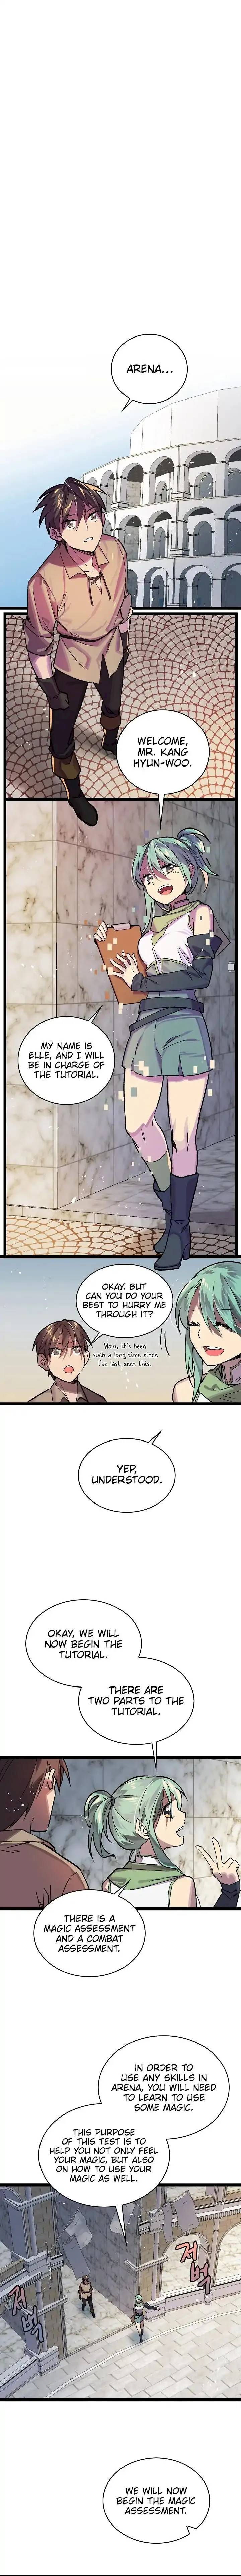 Ranker's Return - Chapter 3 Page 13